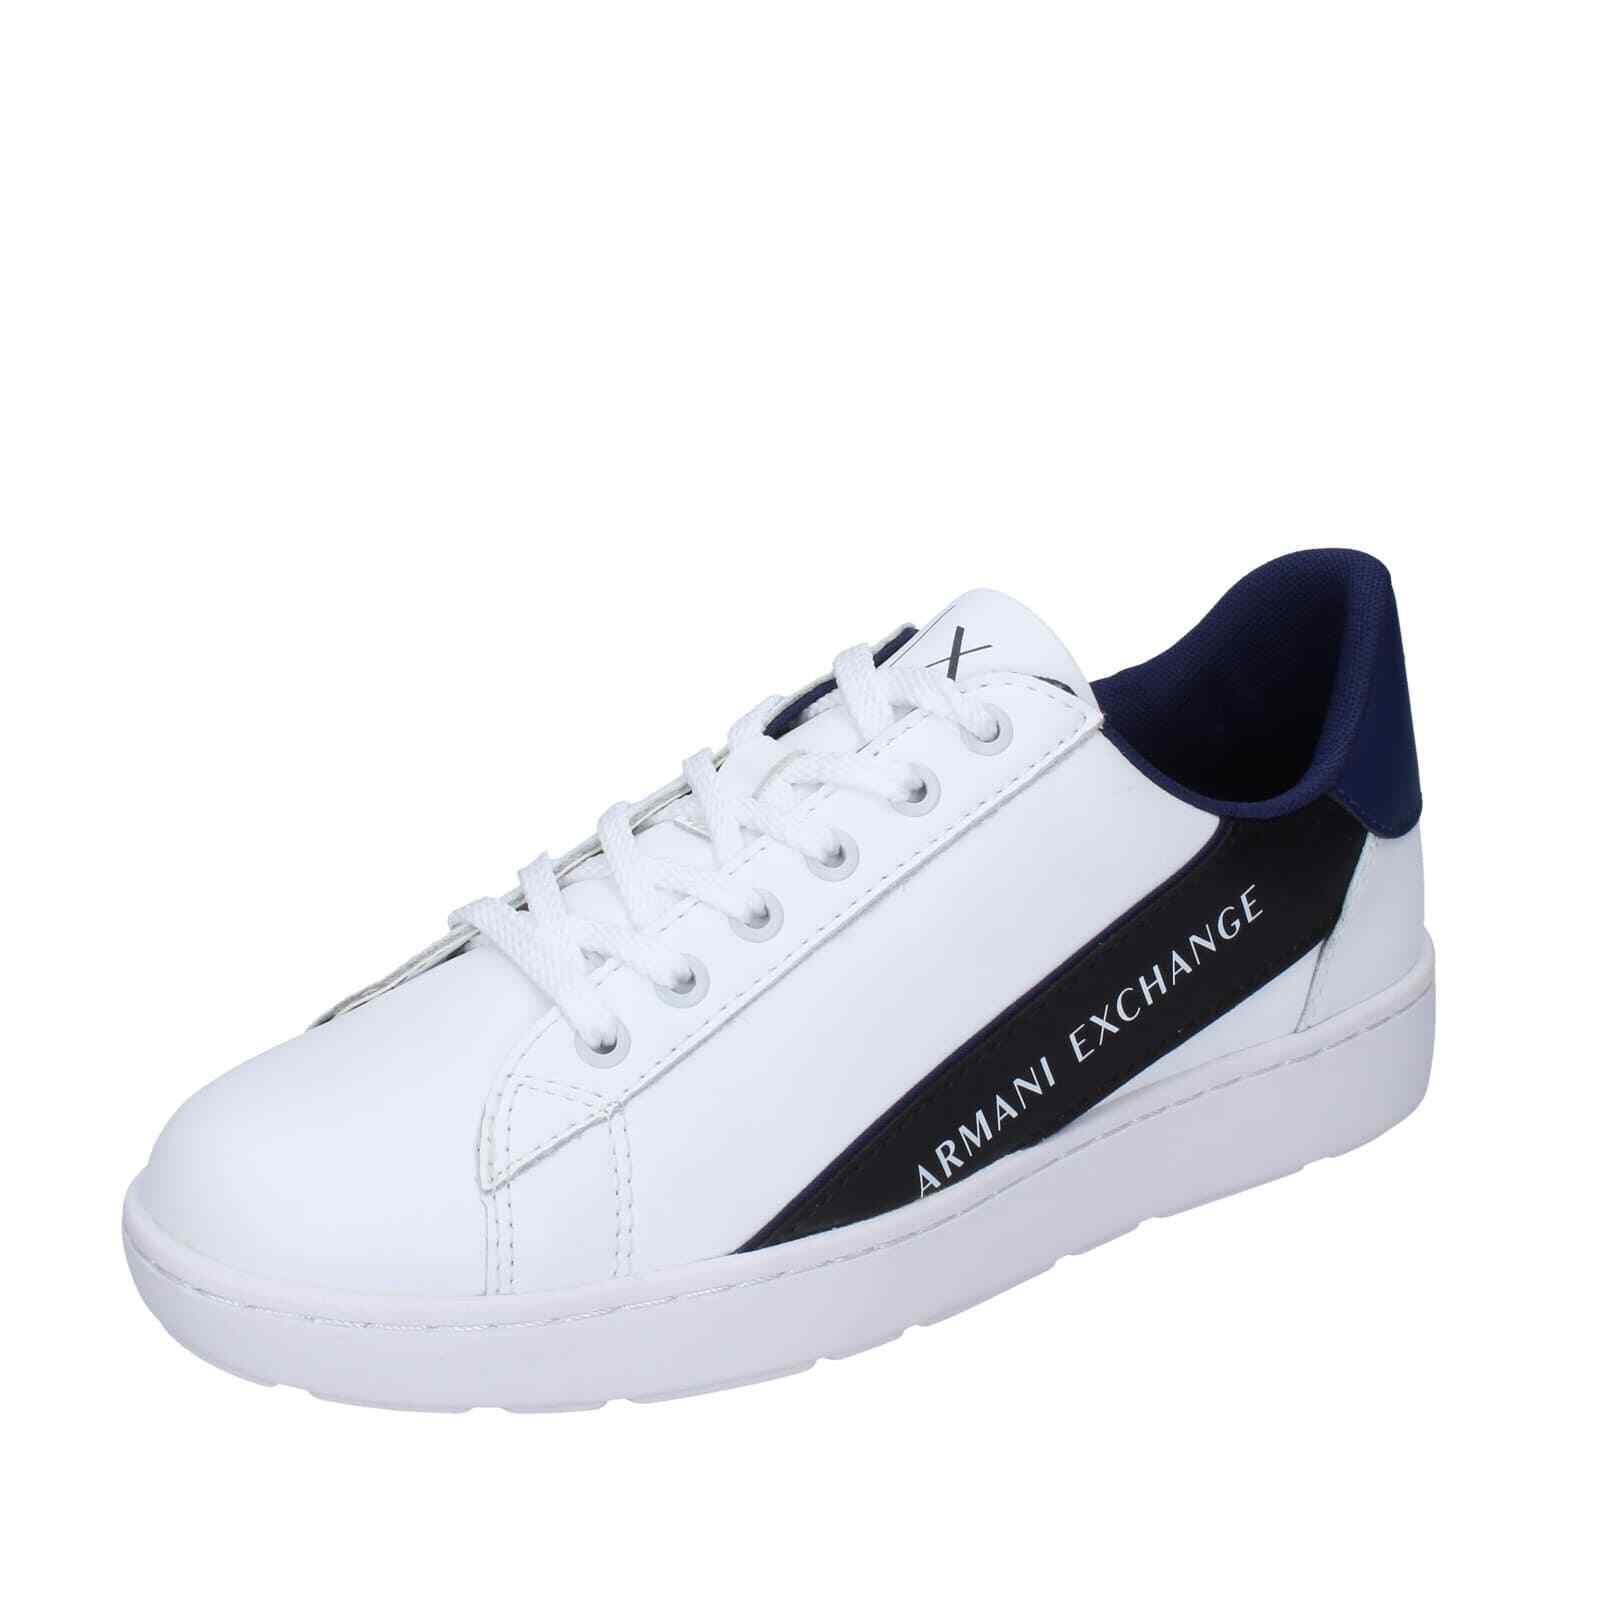 disk Opera mechanism shoes men ARMANI EXCHANGE sneakers white leather blue BF906 | eBay